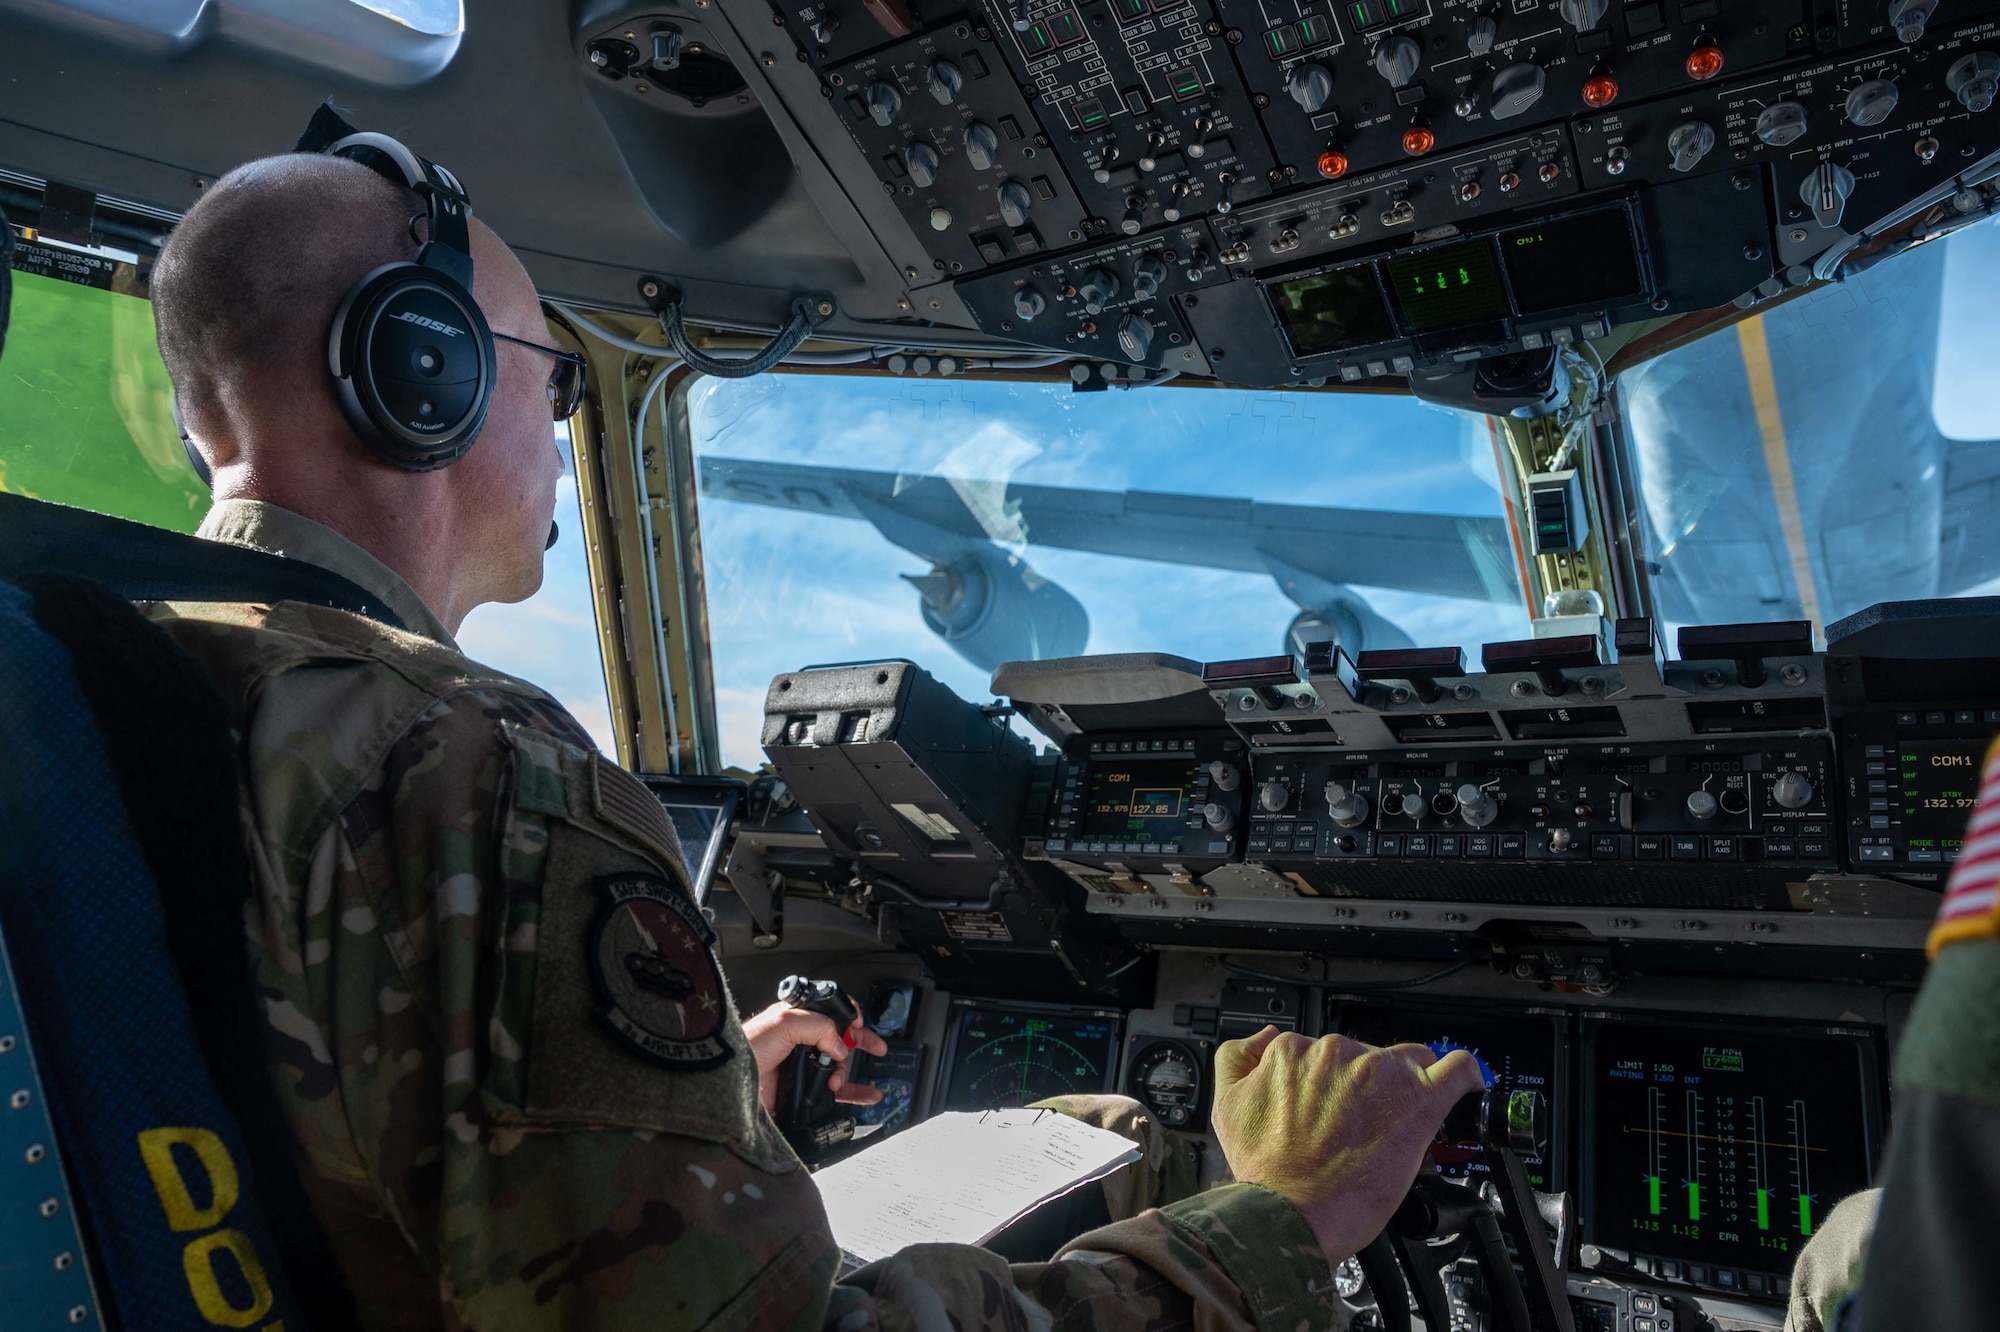 Maj. James Kovarovic, 3rd Airlift Squadron instructor pilot, positions a C-17 Globemaster III for an inflight refueling with a KC-135 Stratotanker assigned to the 134th Air Refueling Wing, Tennessee Air National Guard on Dec. 10, 2020. The 436th Airlift Wing operates routine training missions to maintain mission readiness. (U.S. Air Force photo by Airman 1st Class Faith Schaefer)